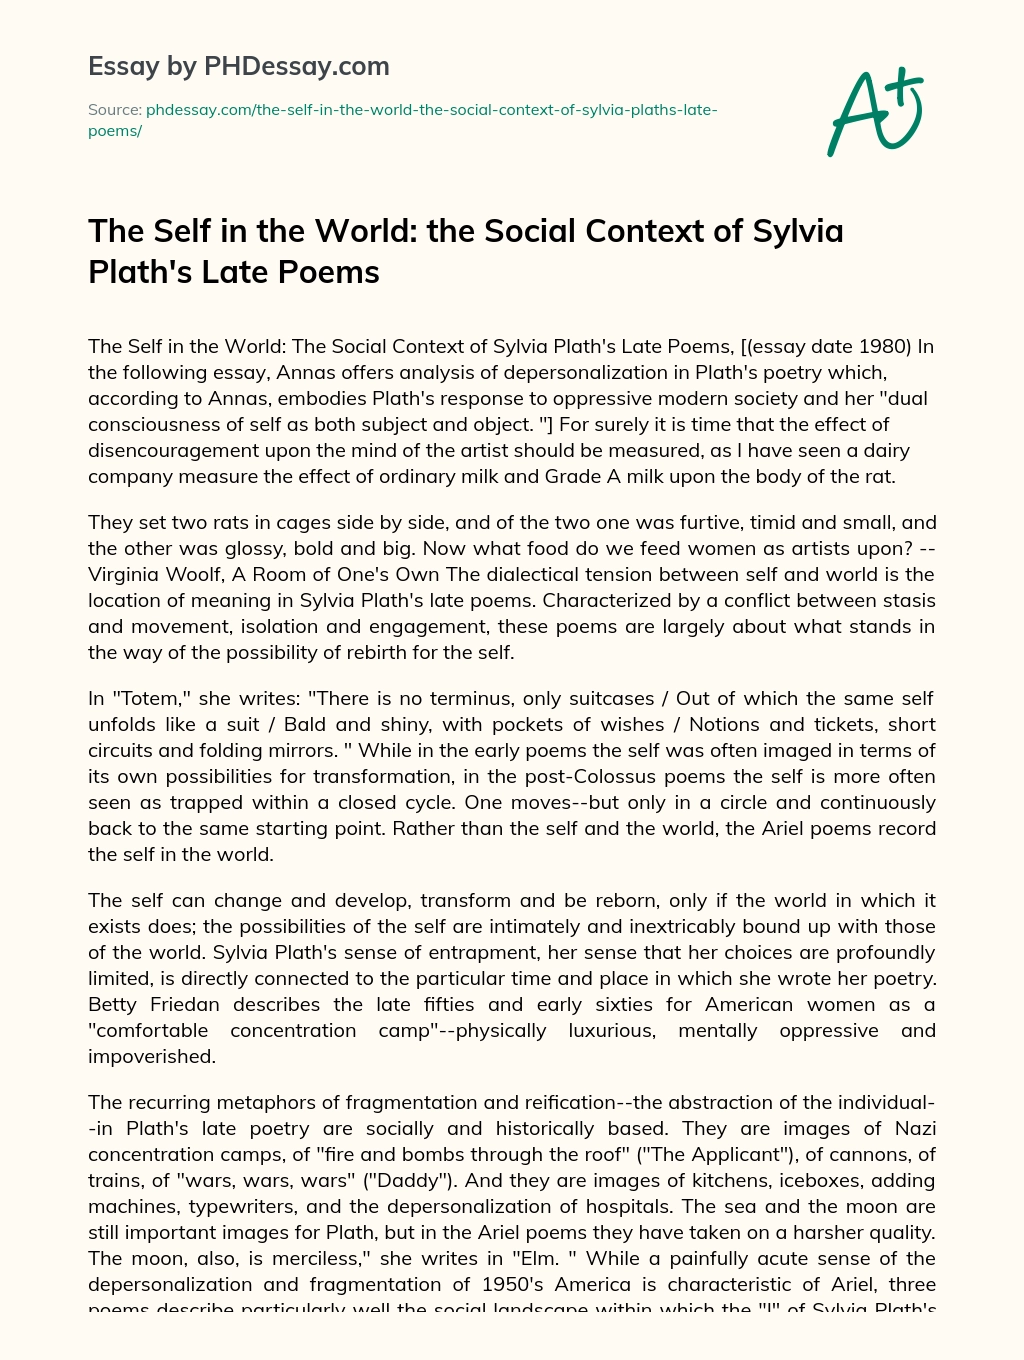 The Self in the World: the Social Context of Sylvia Plath’s Late Poems essay